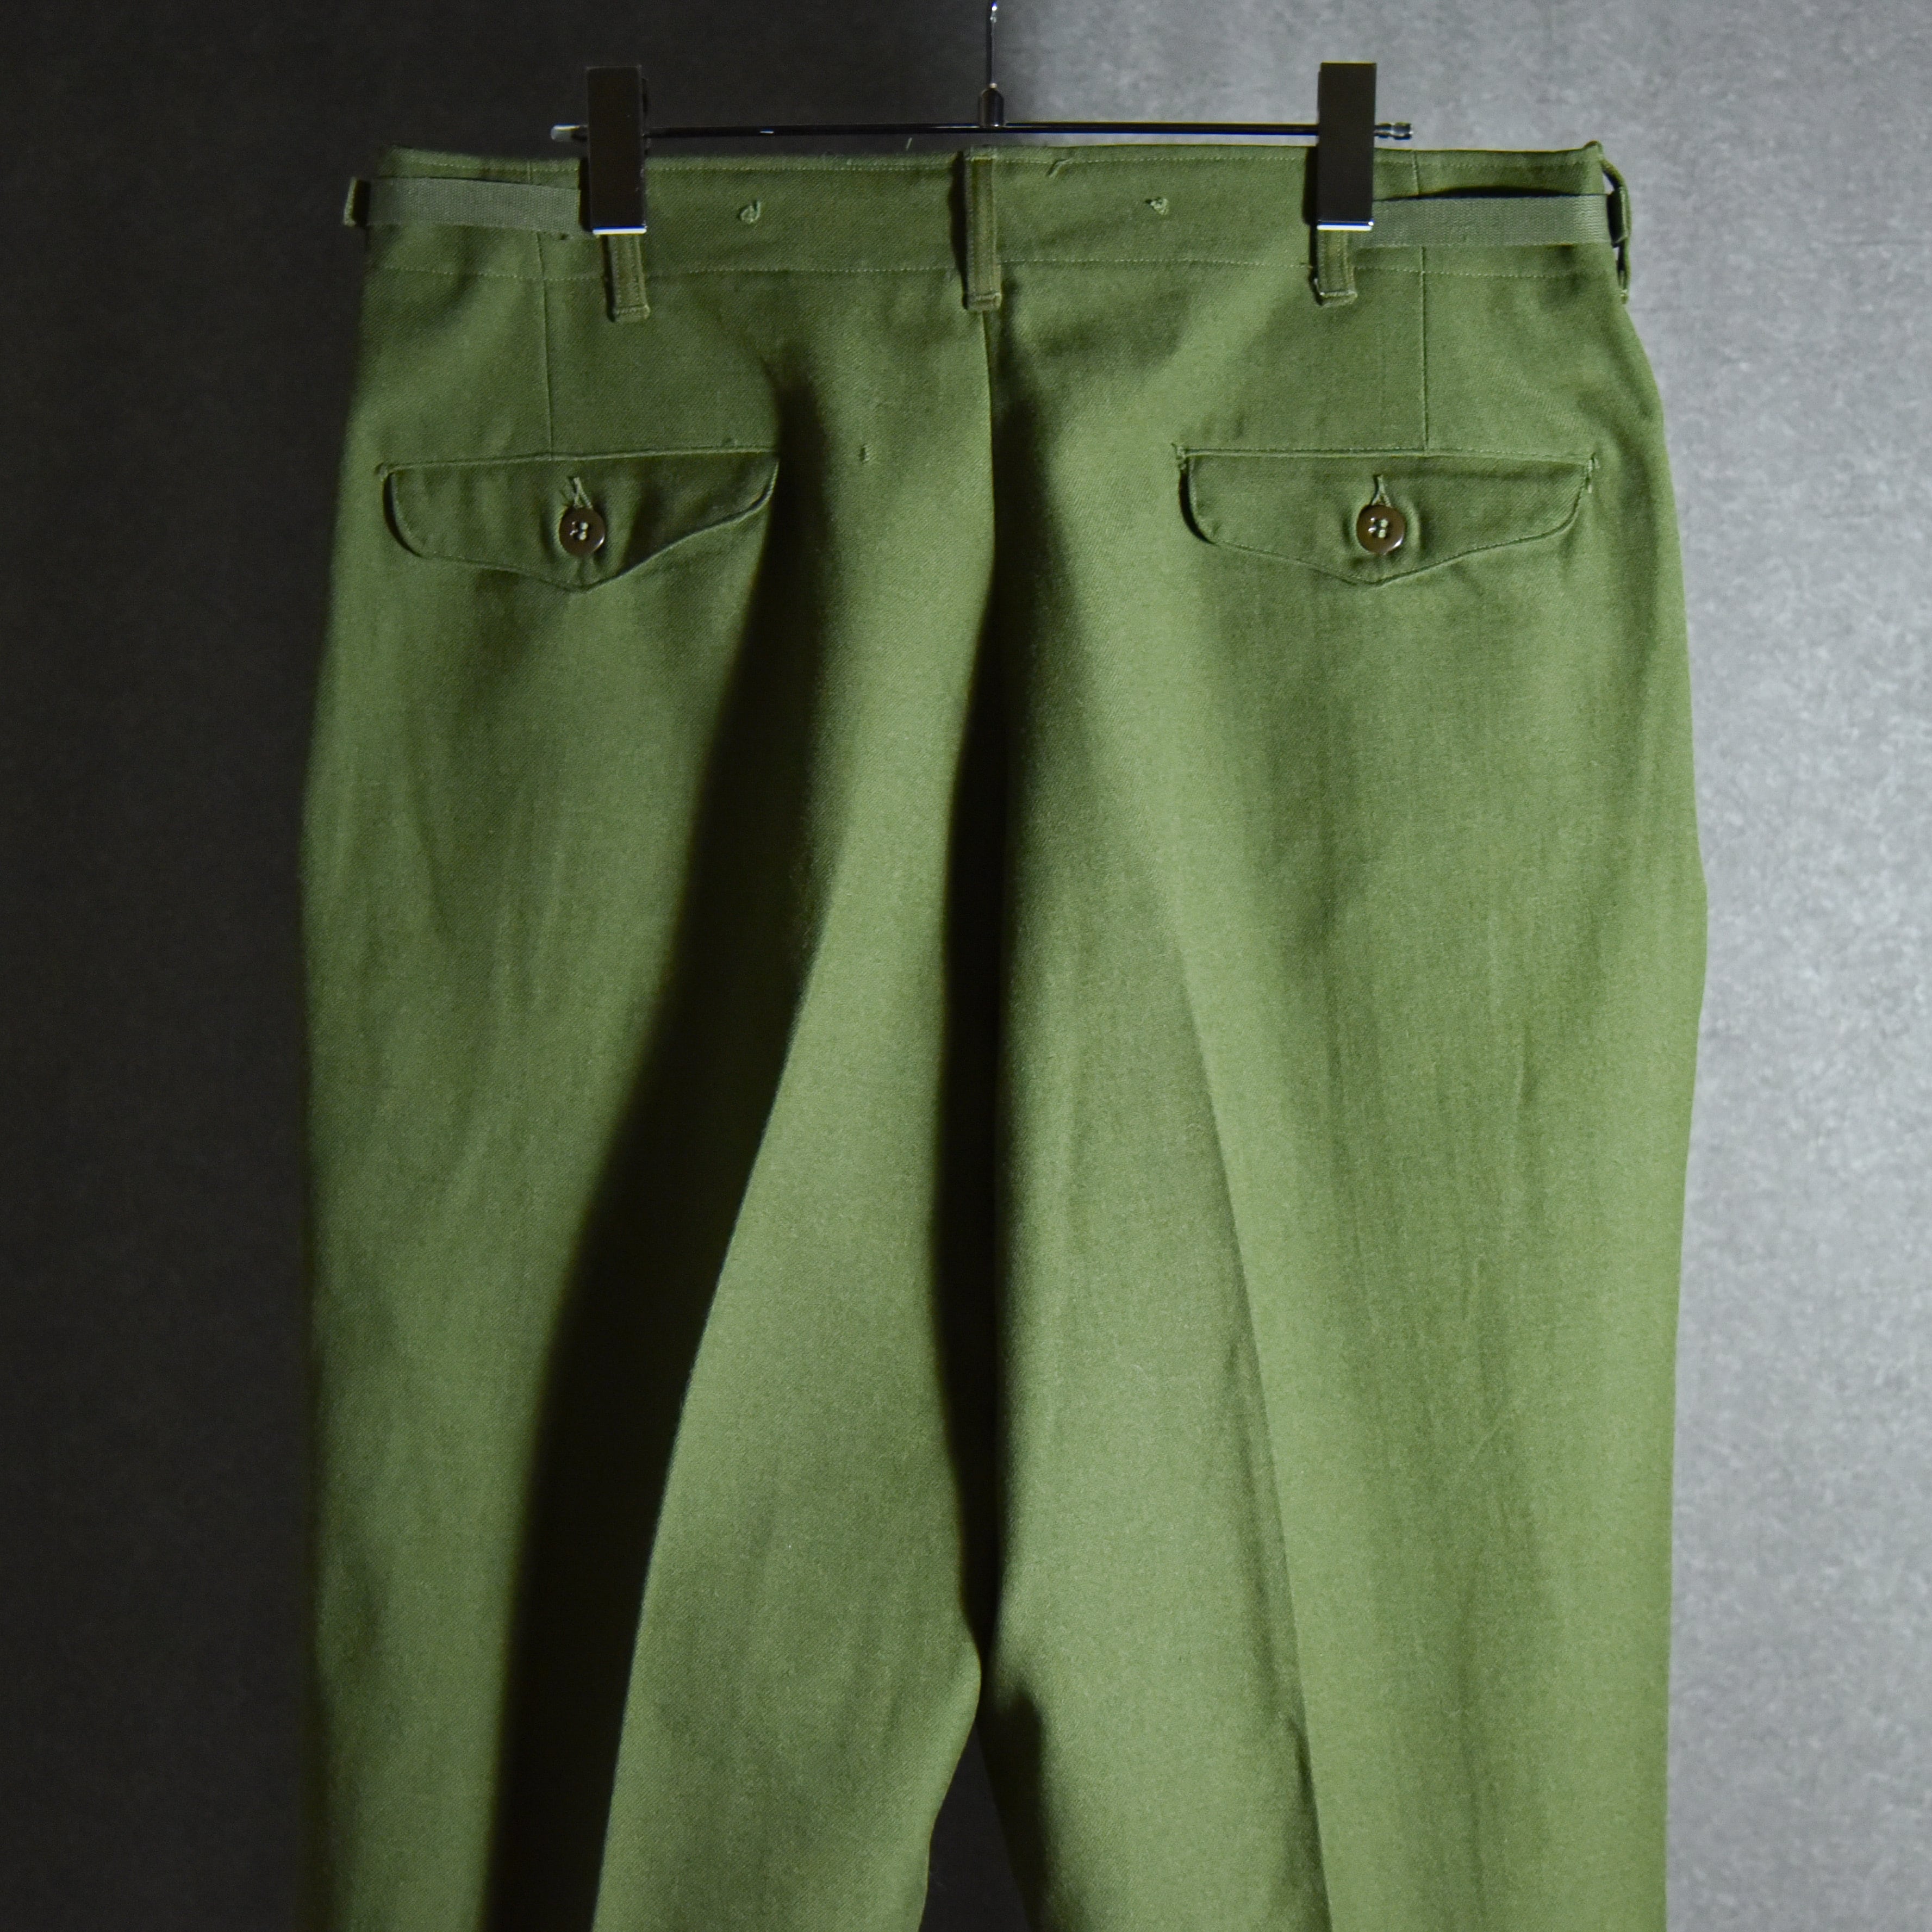 DEAD STOCK】US Army M51 Wool Trousers アメリカ軍 ウール トラウザー 